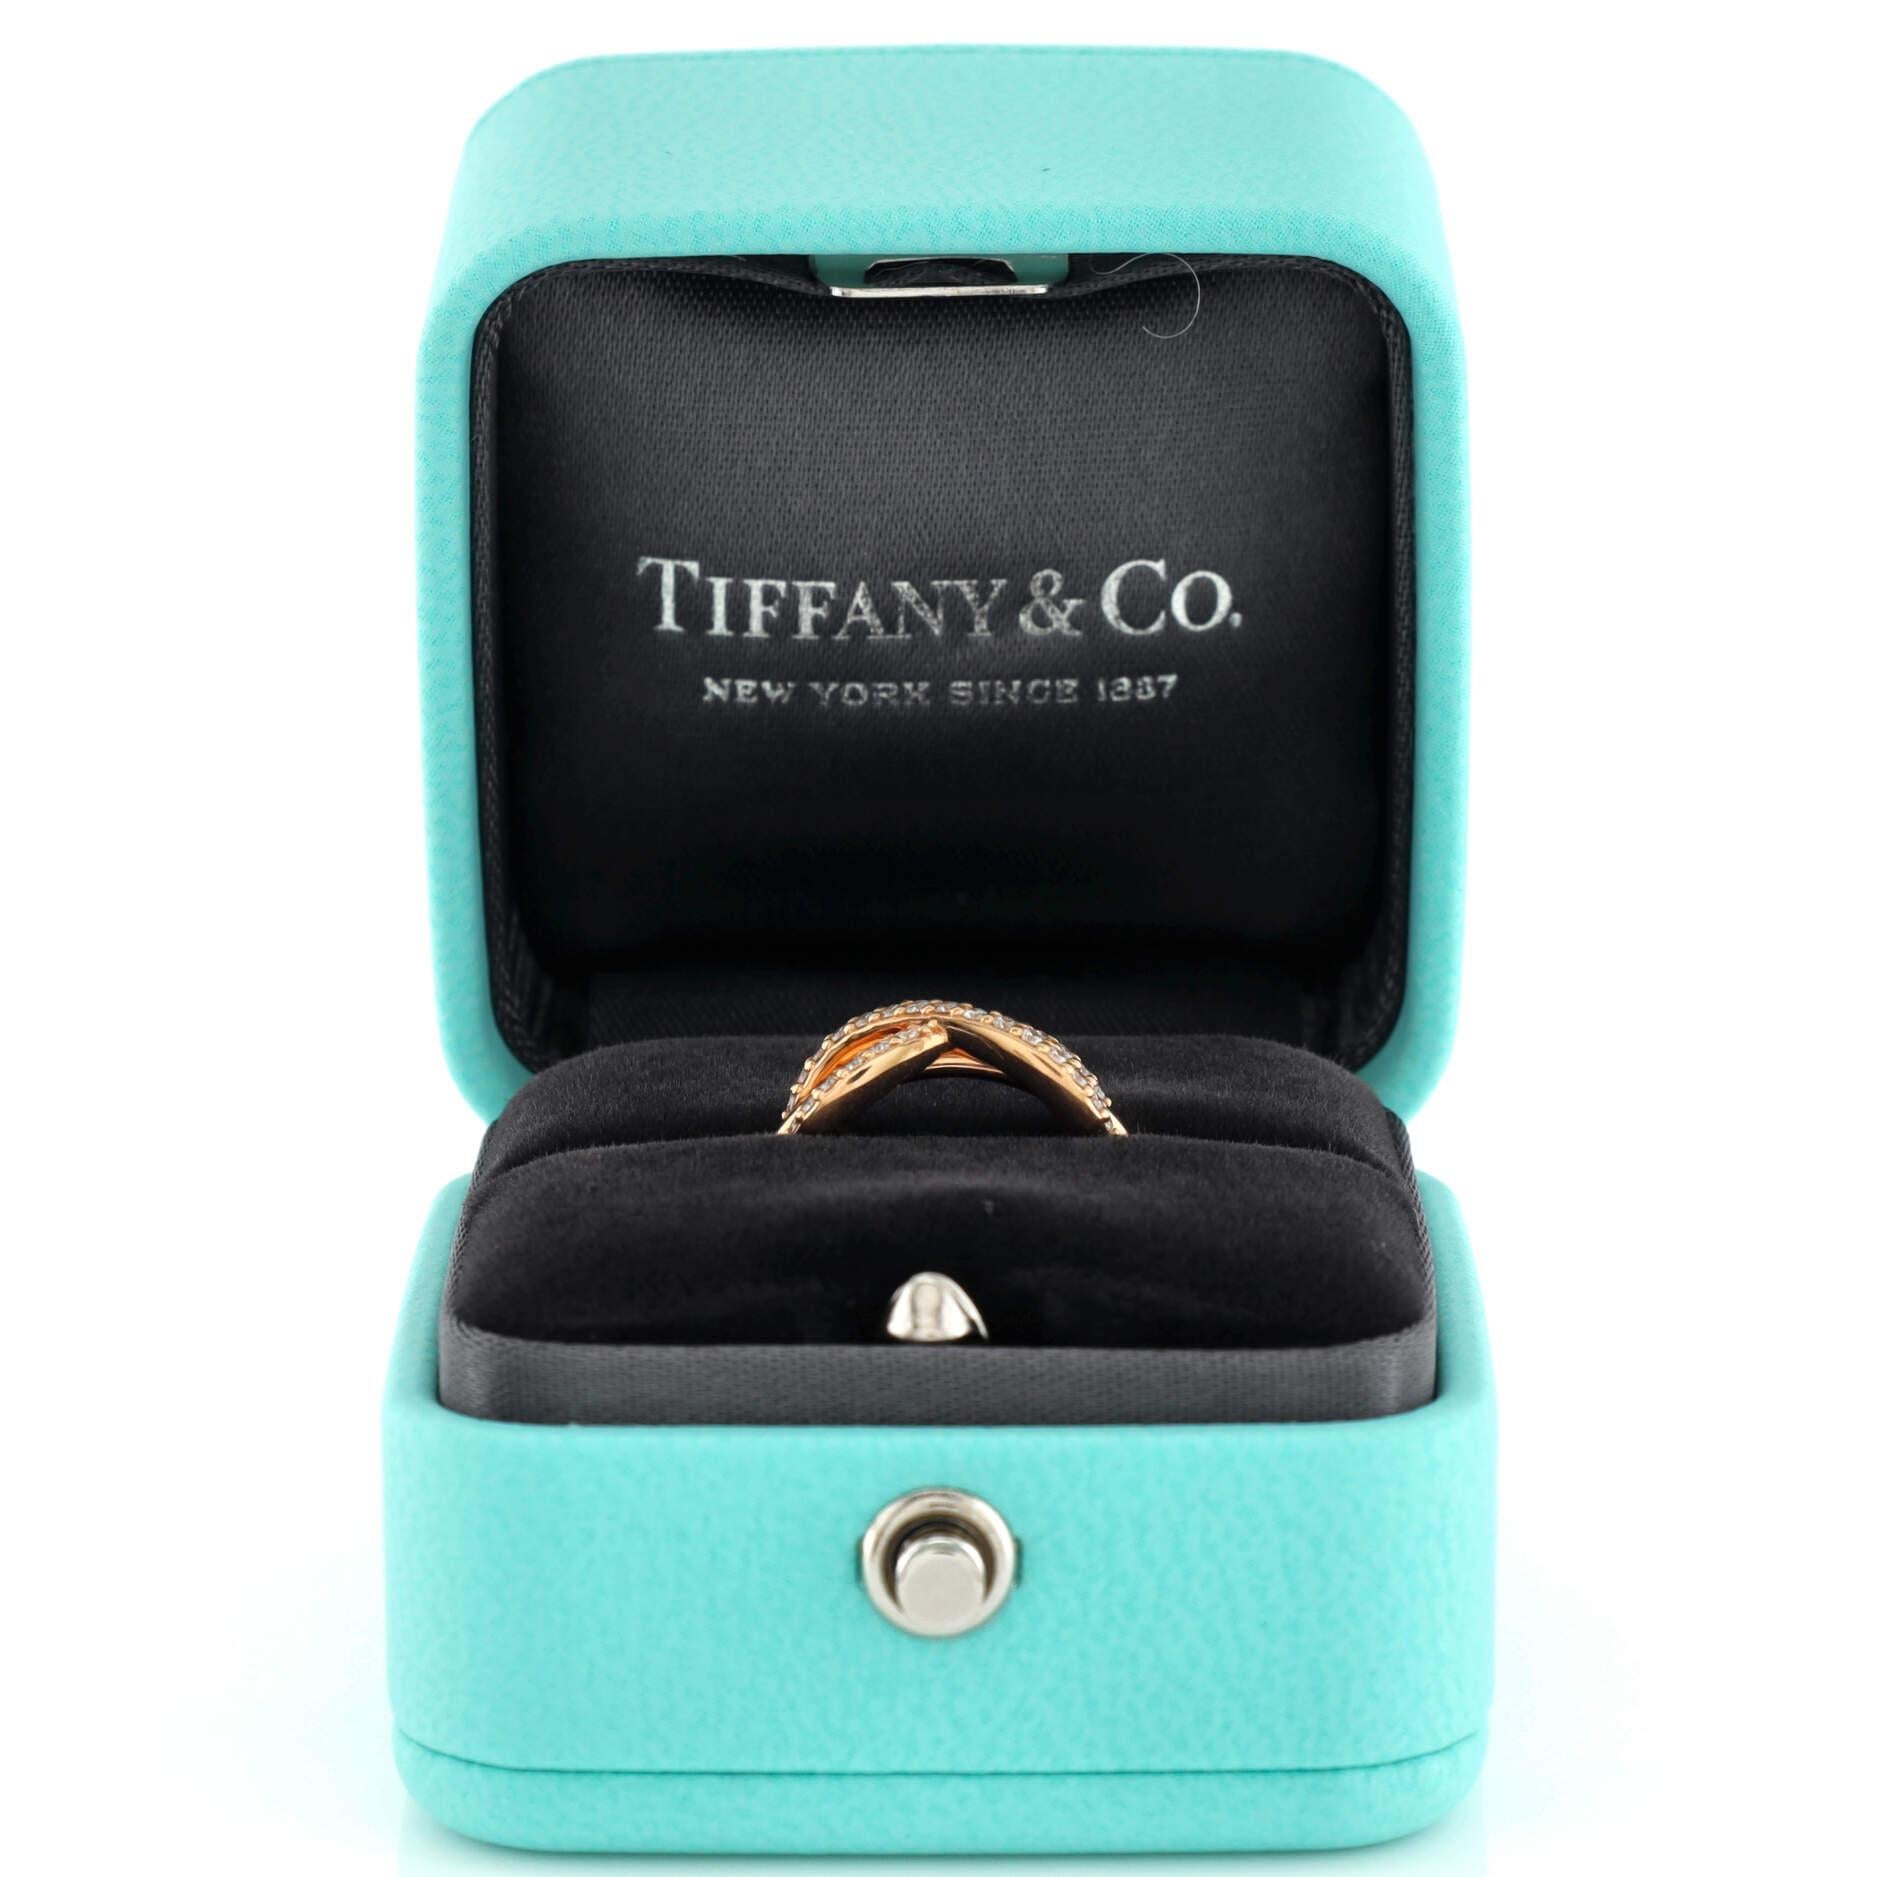 Condition: Excellent. Faint wear throughout.
Accessories: No Accessories
Measurements: Size: 3.75 - 46, Width: 2.45 mm
Designer: Tiffany & Co.
Model: Infinity Ring 18K Rose Gold and Diamonds
Exterior Color: Rose Gold
Item Number: 224822/1